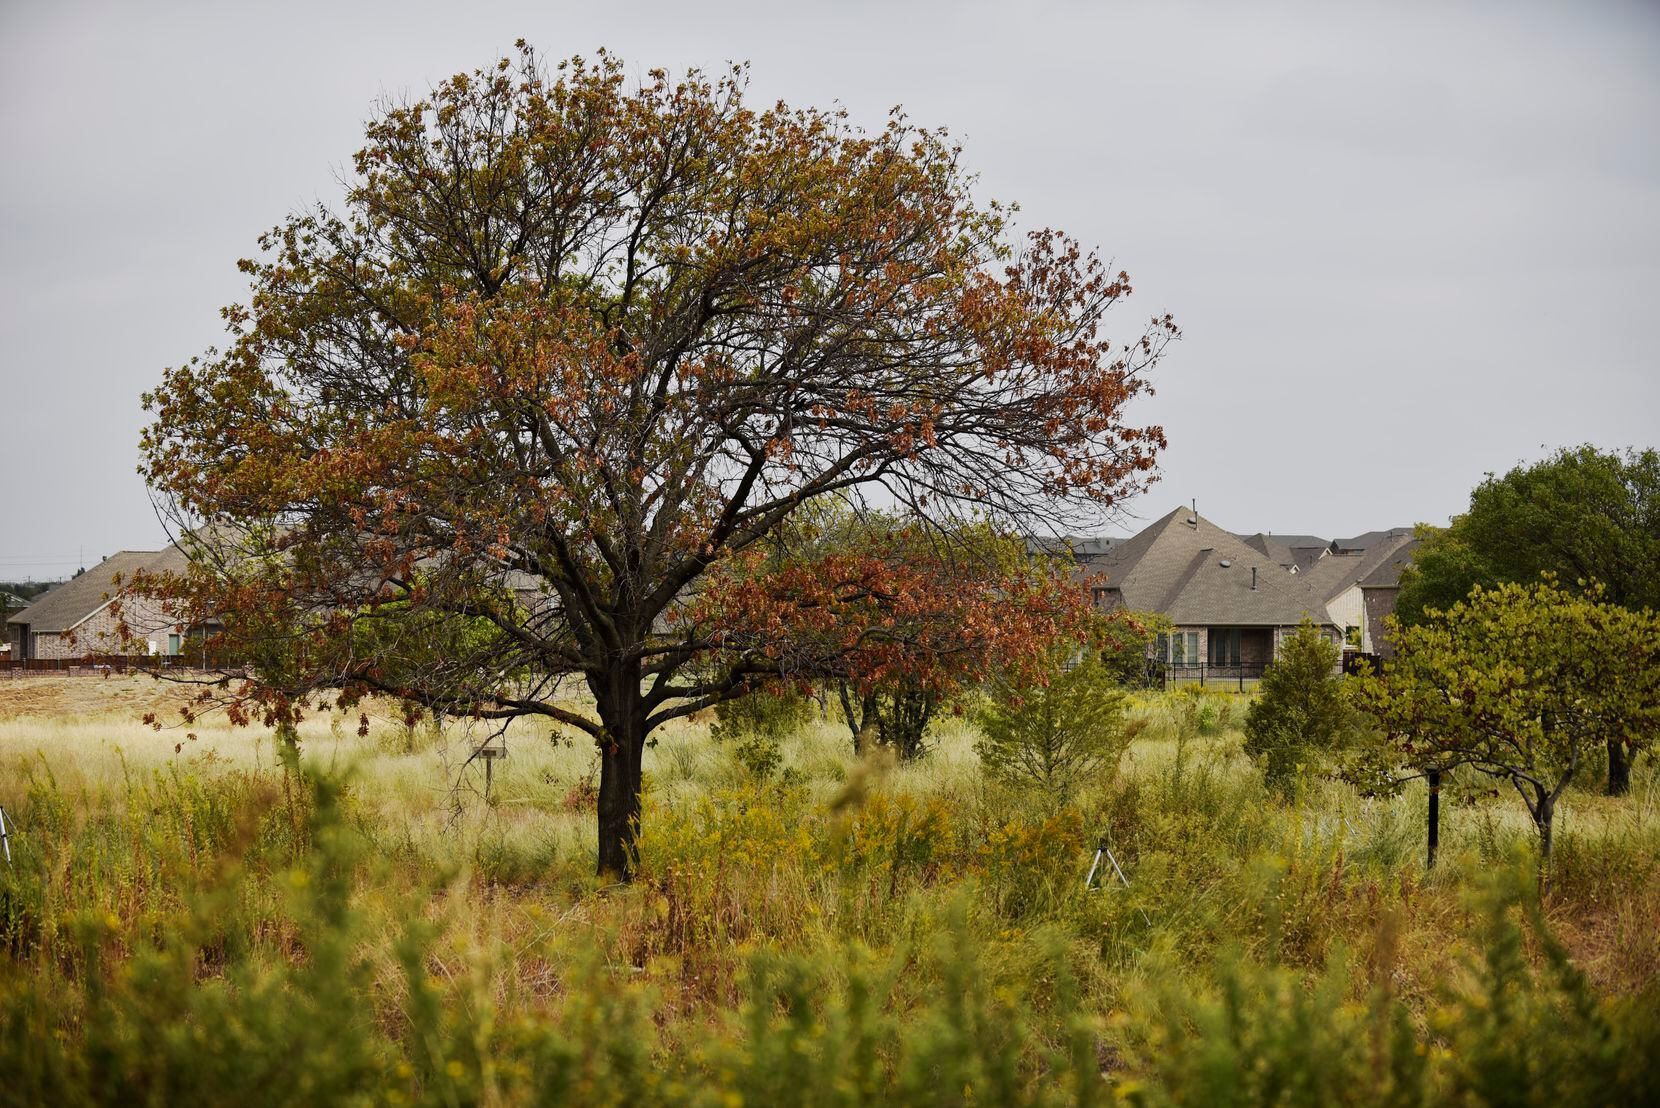 A Bur oak tree, one of many trees planted by Benny J. Simpson over 30 years, is located at...